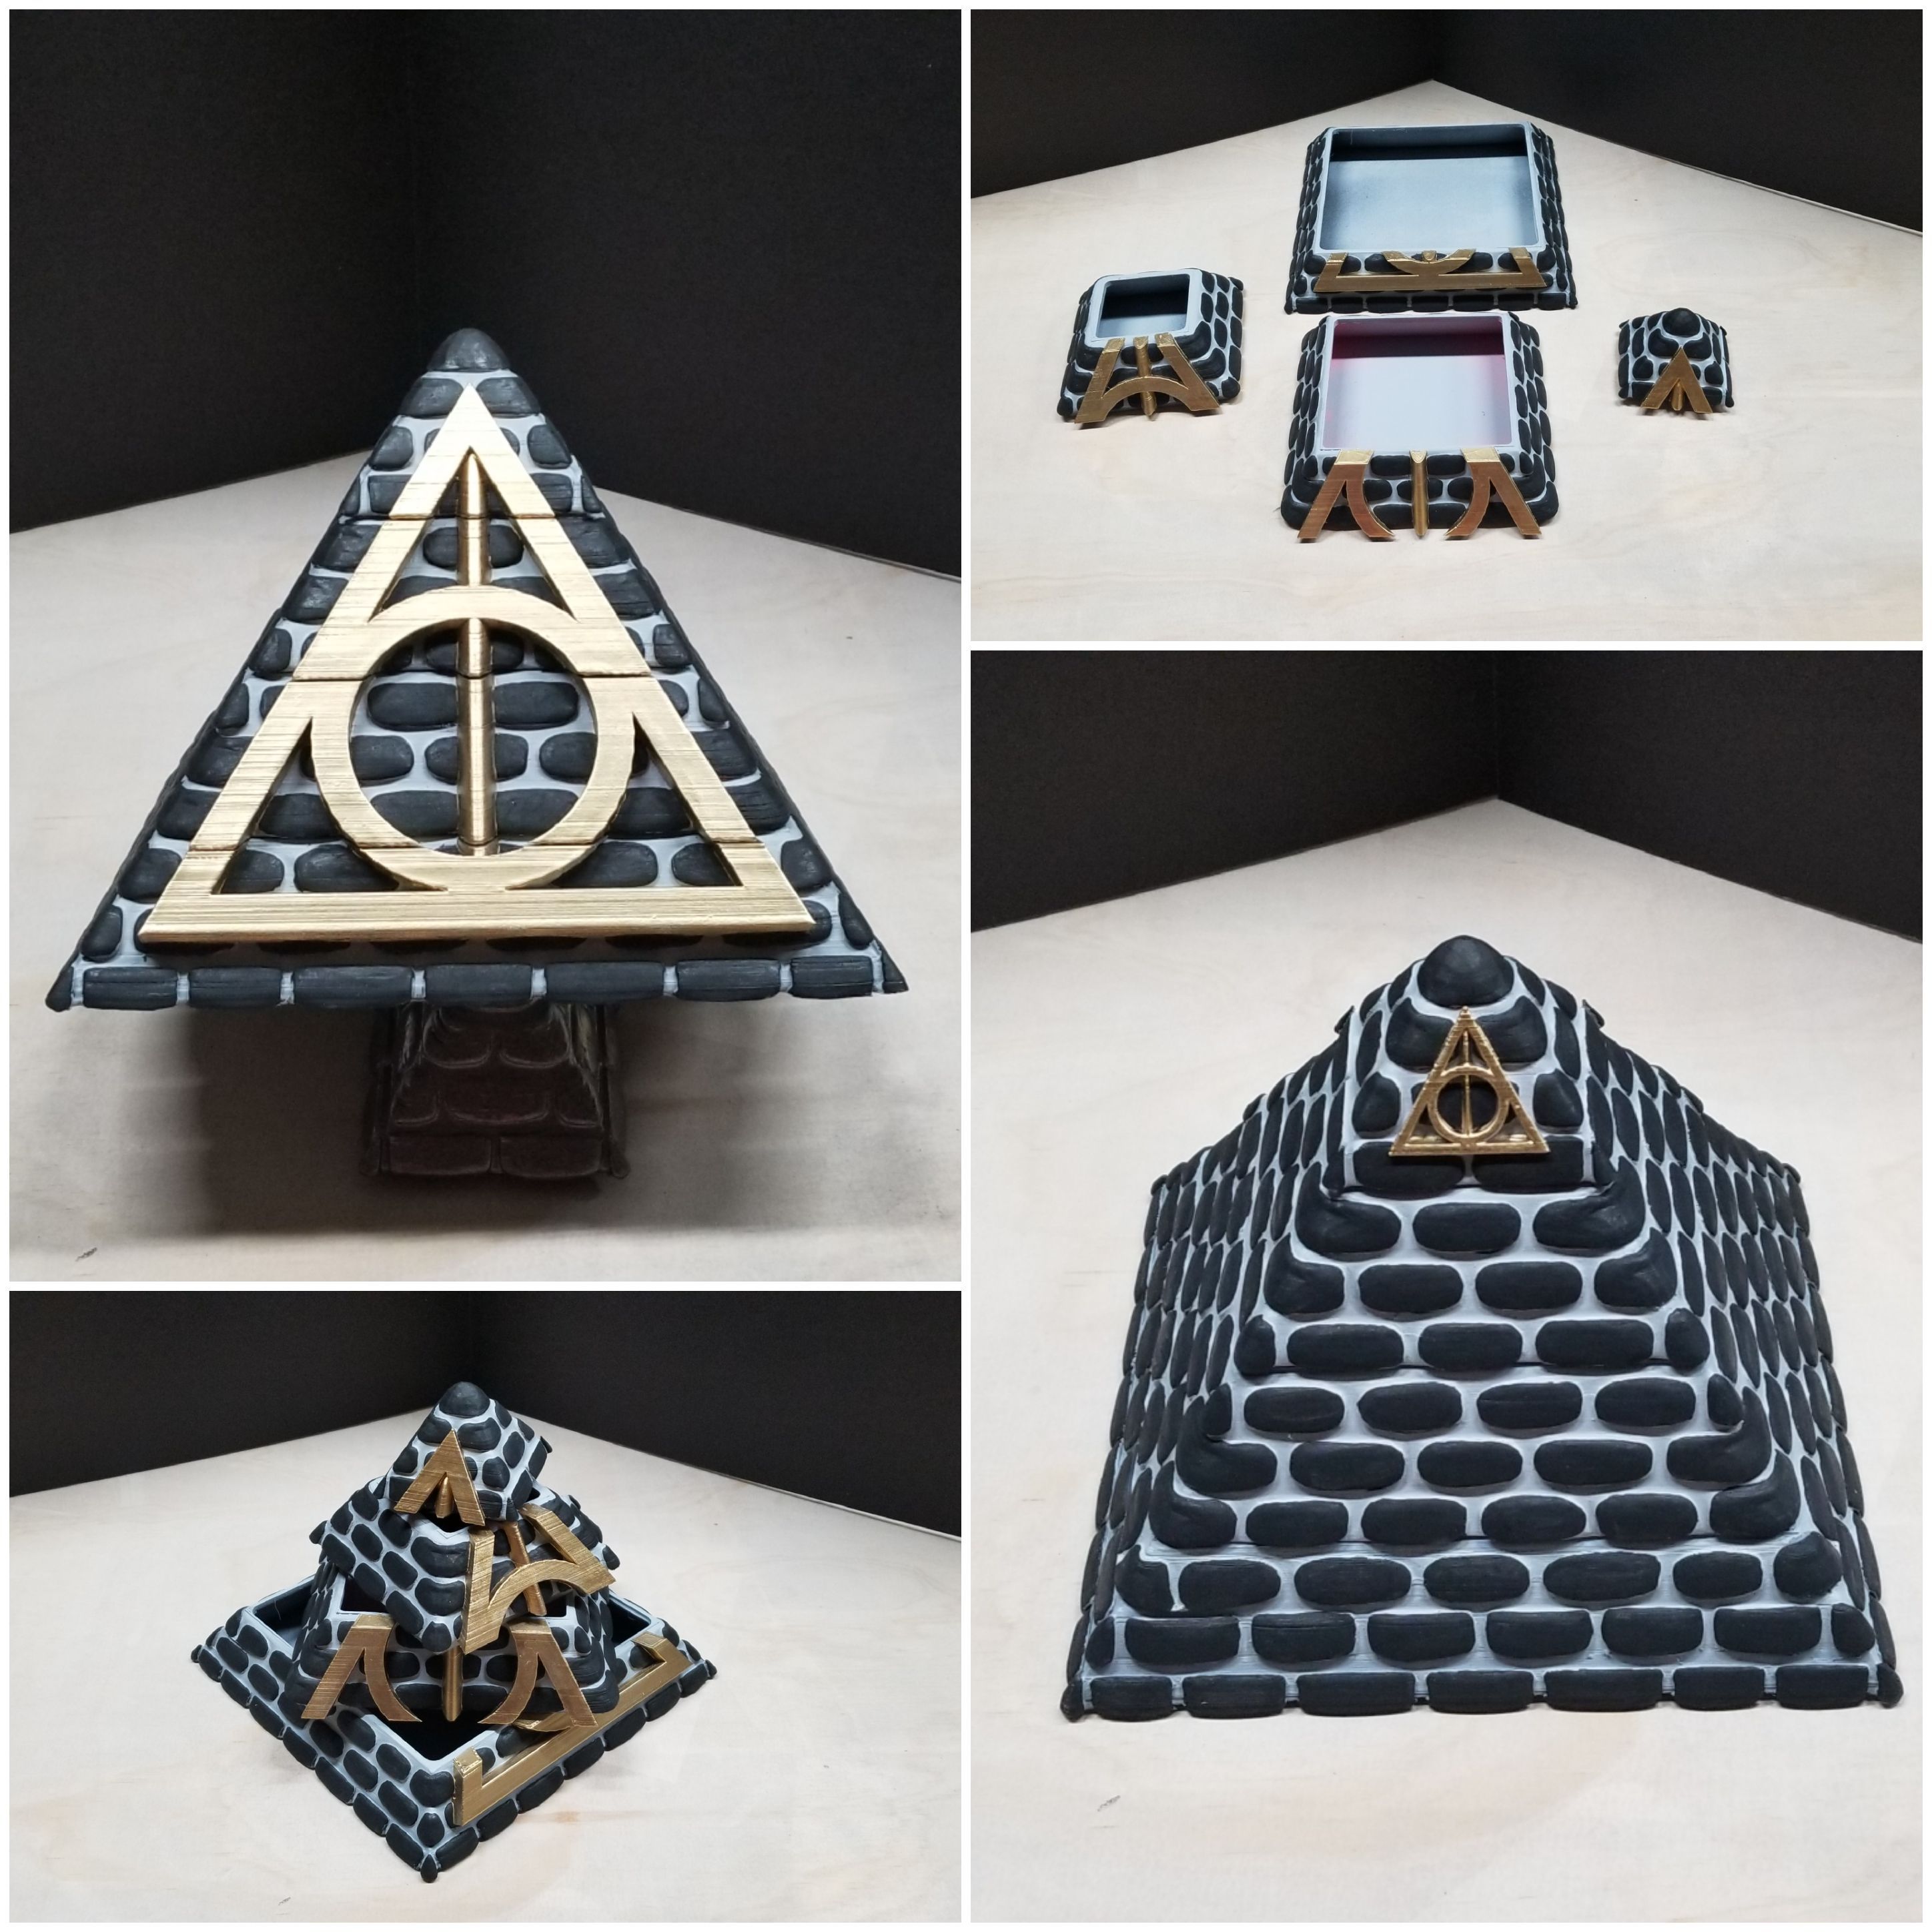 20190529_164326[1].jpg Download free STL file POTTER PYRAMID BOX with a Chamber of secrets • 3D printable model, LittleTup